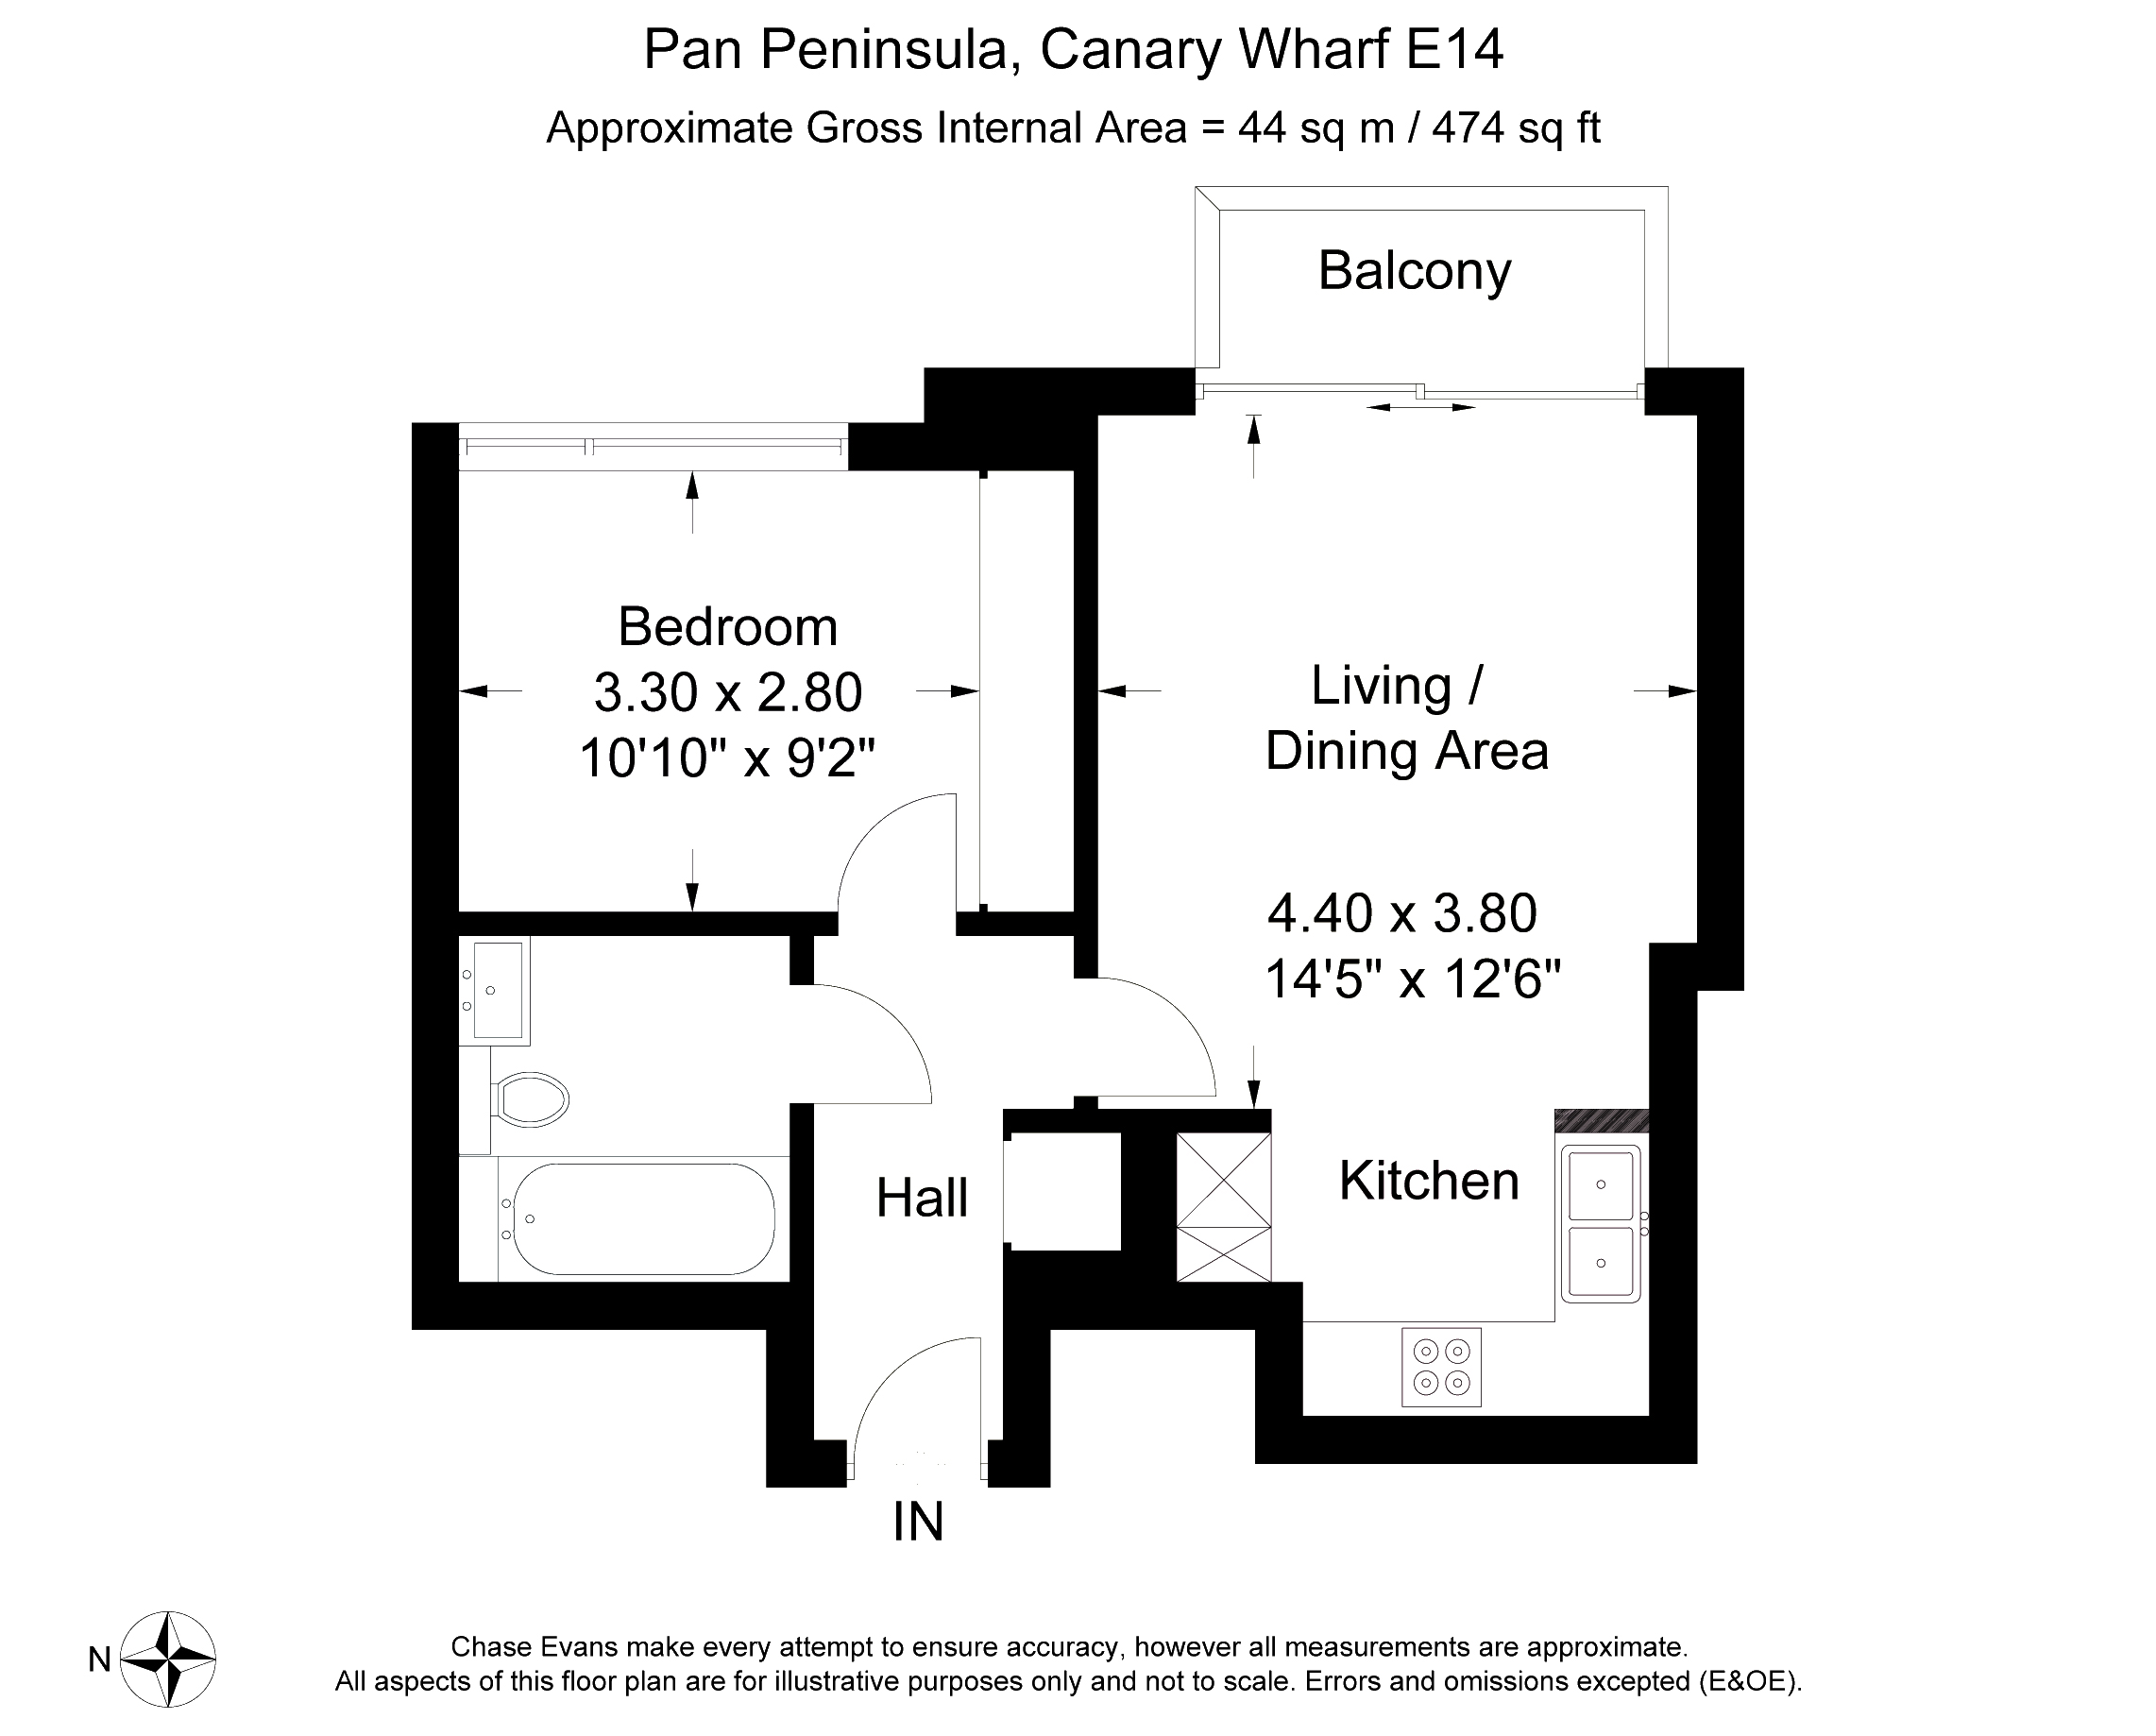 1 Bedrooms Flat to rent in West Tower, Pan Peninsula, Canary Wharf E14